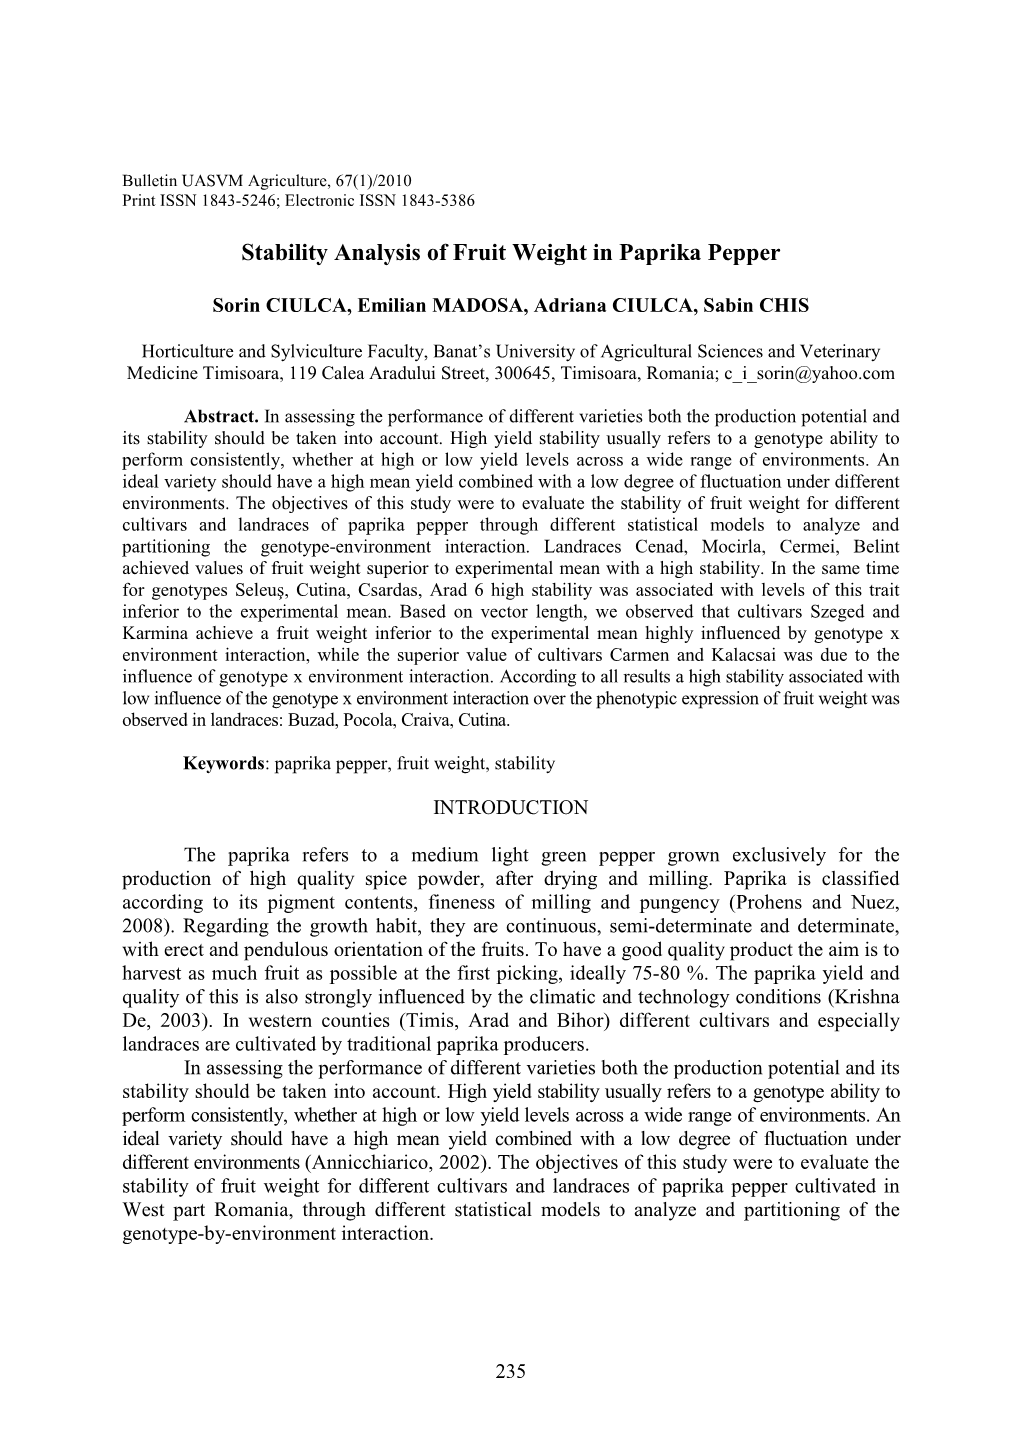 Stability Analysis of Fruit Weight in Paprika Pepper